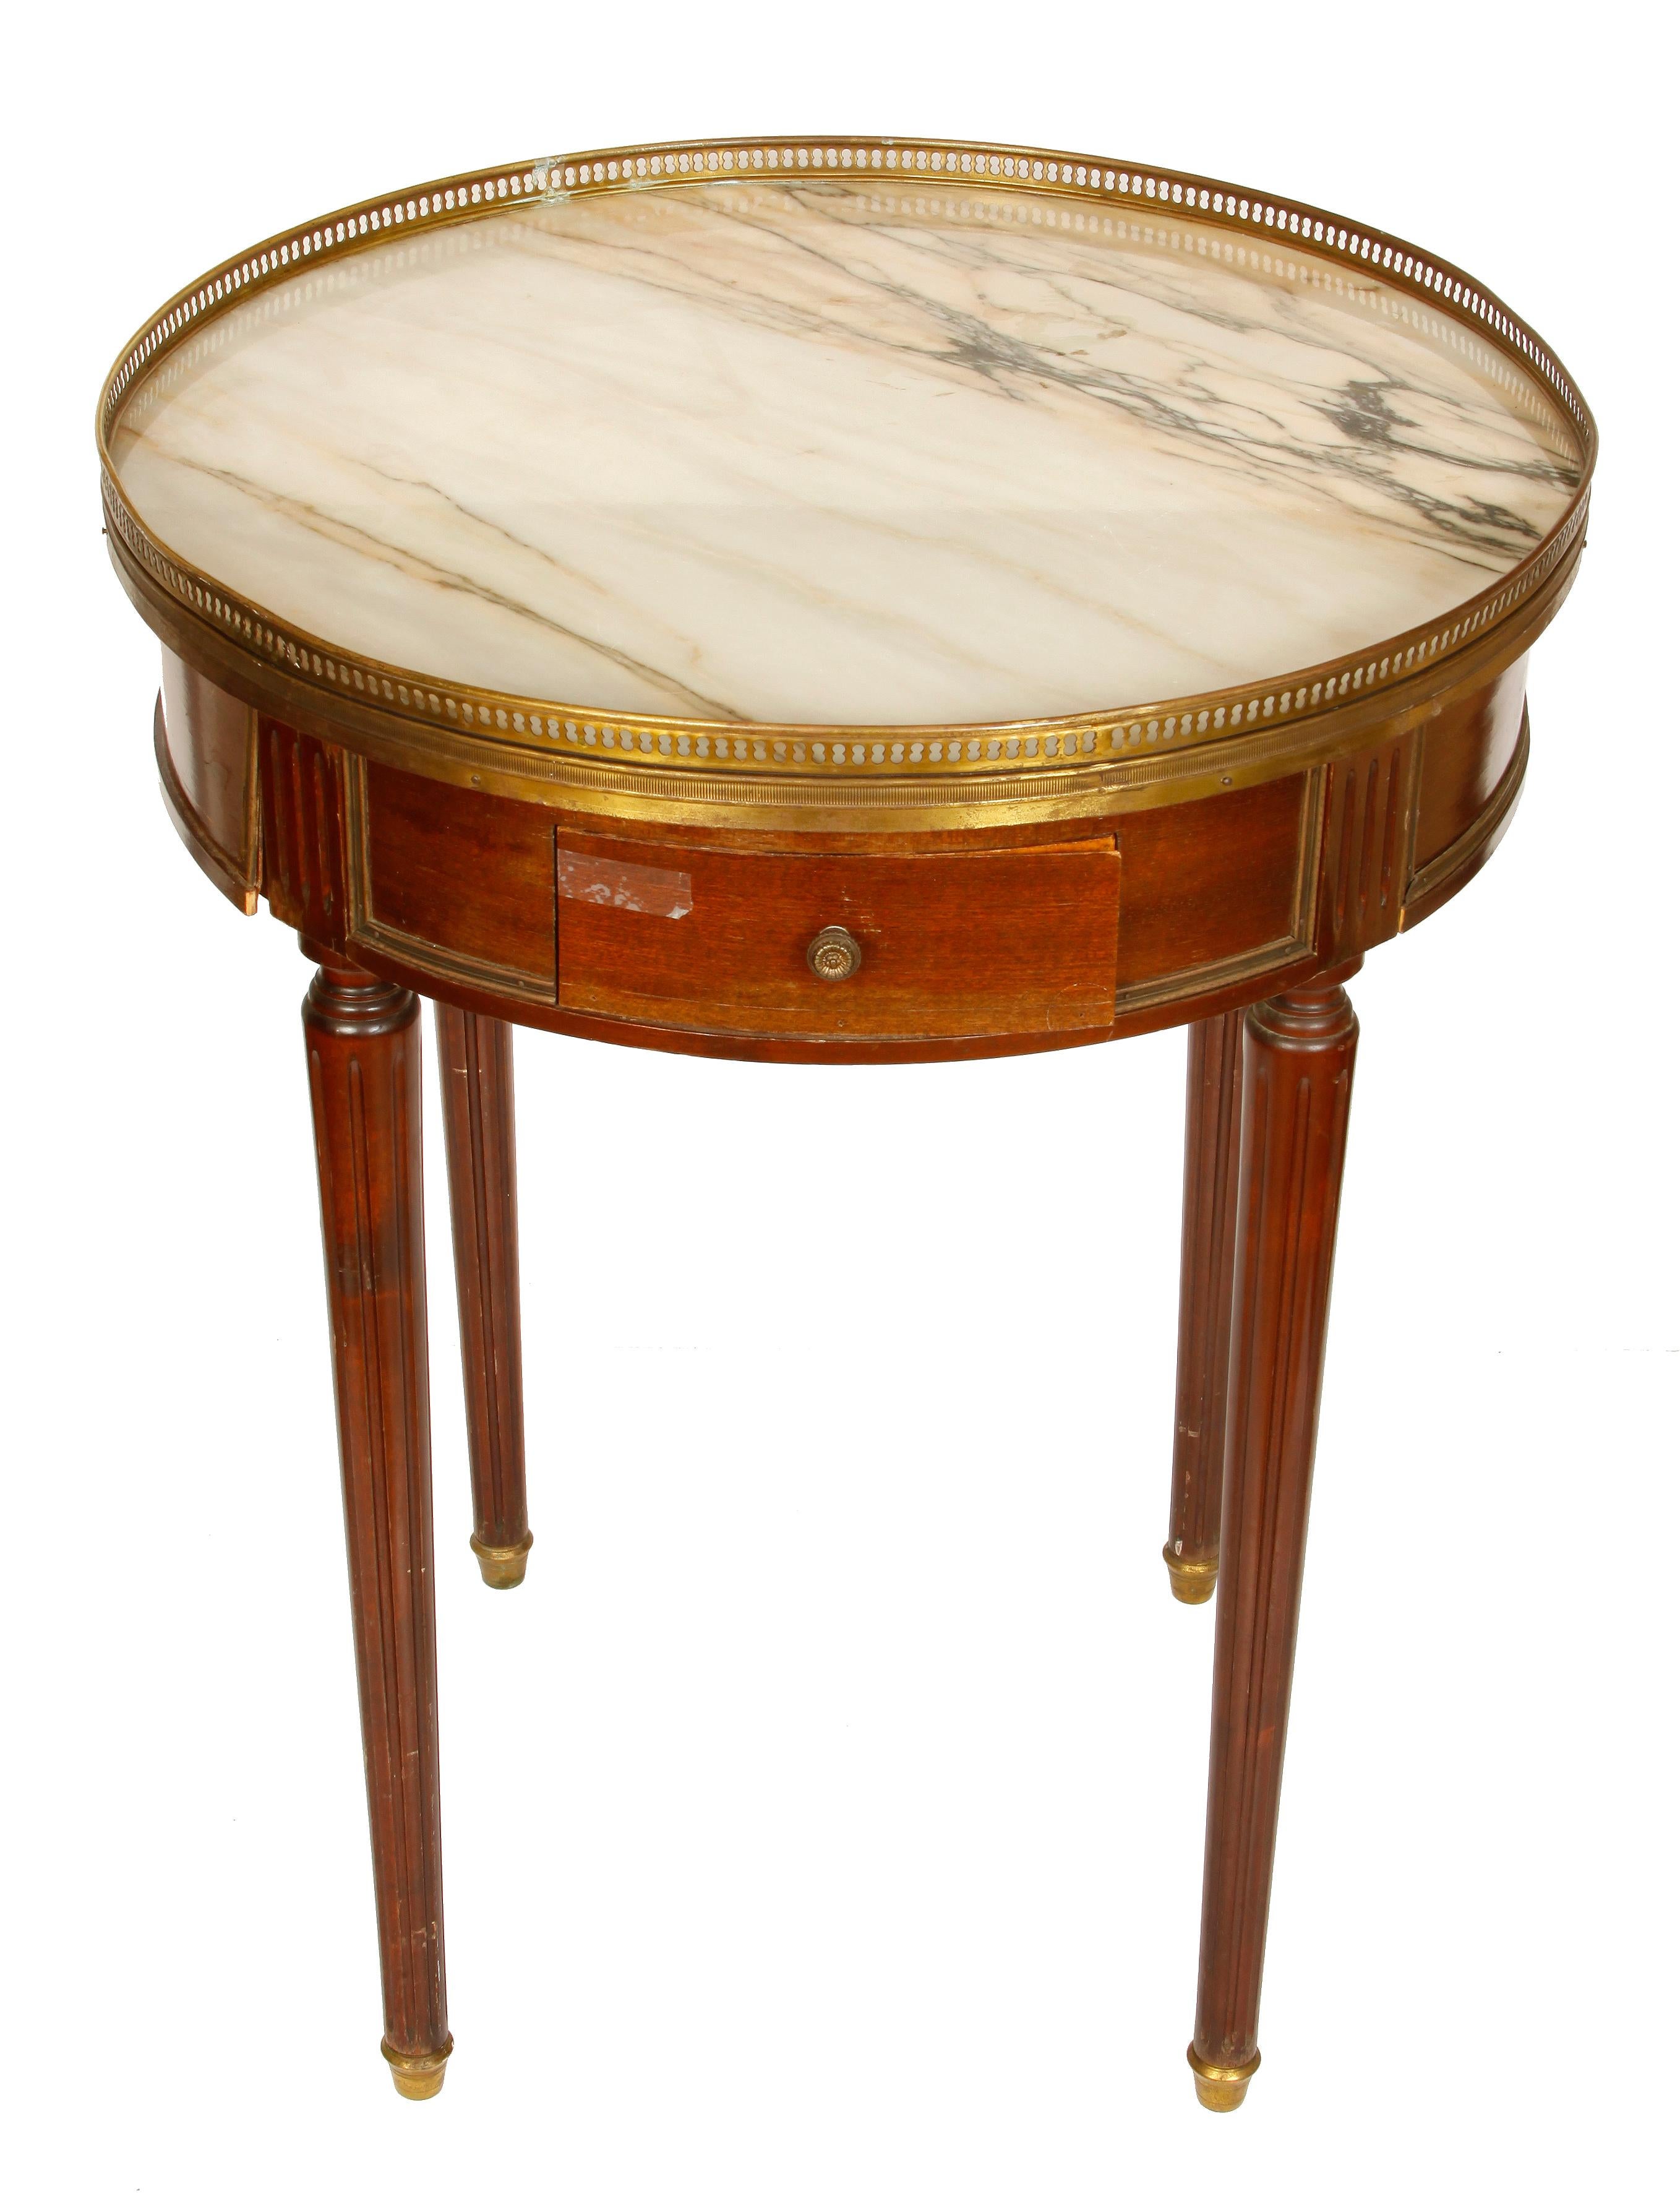 Louis XVI style bouillotte table with a pierced brass gallery encircling a marble top and brass caps on the feet.